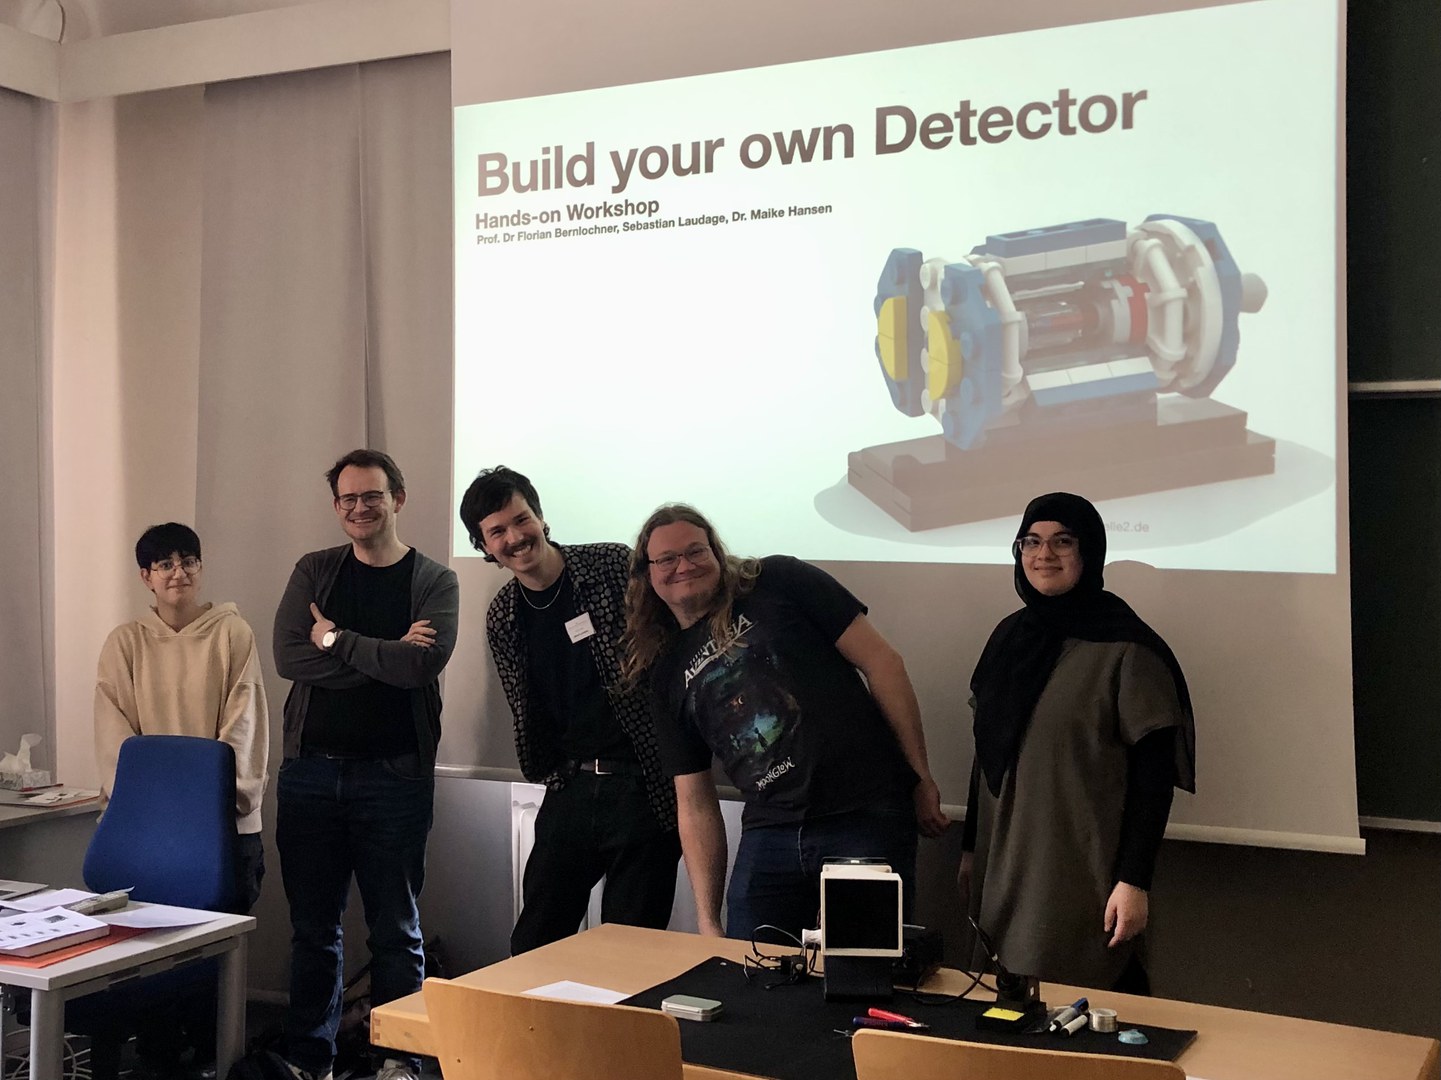 Start of the DIY detector workshop with the leaders and helpers